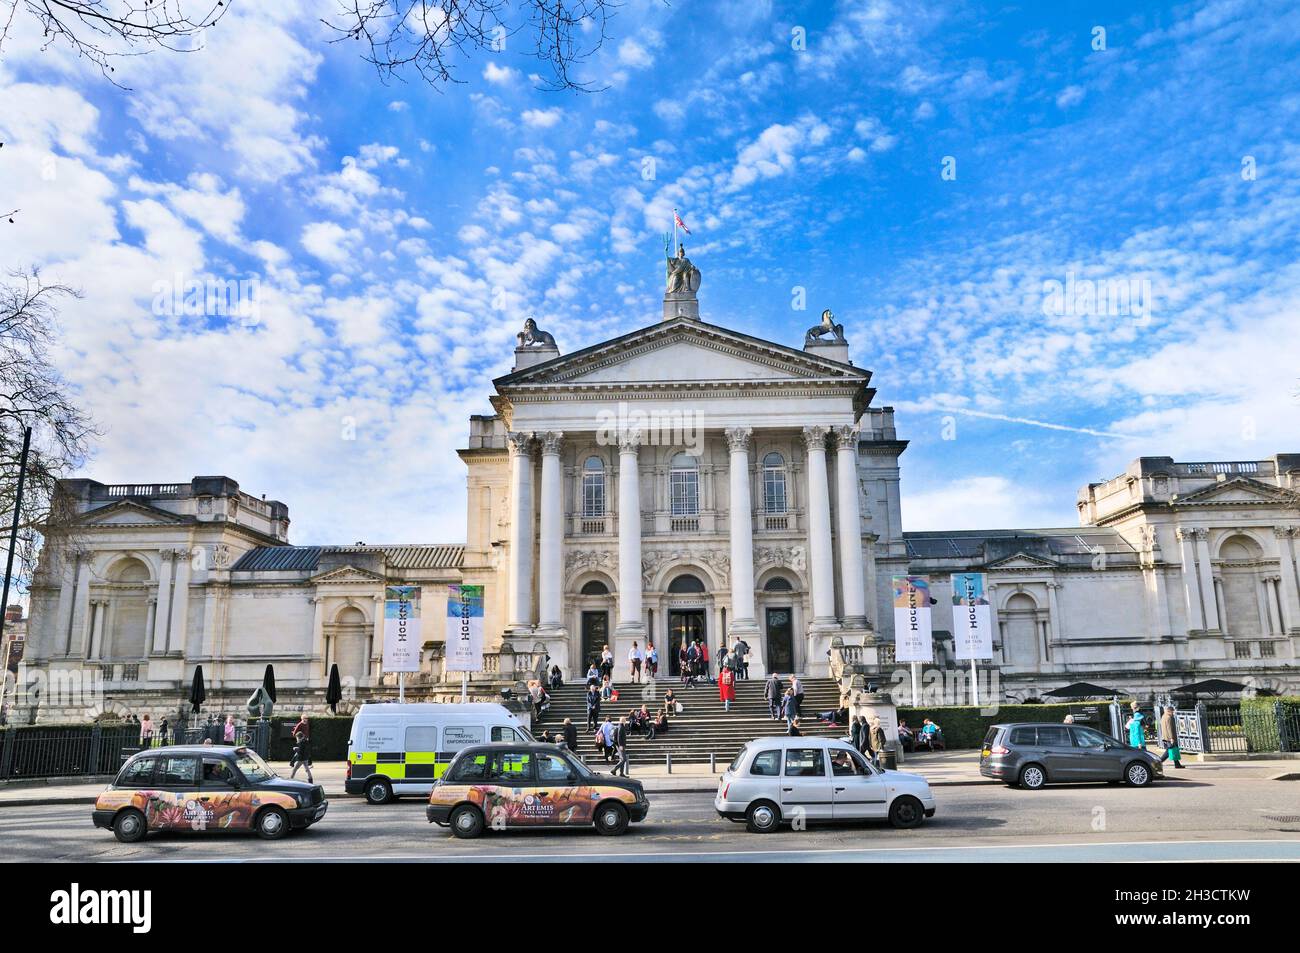 Tate Britain Art Gallery Museum a Millbank, City of Westminster, Londra, Inghilterra, Regno Unito. Foto Stock